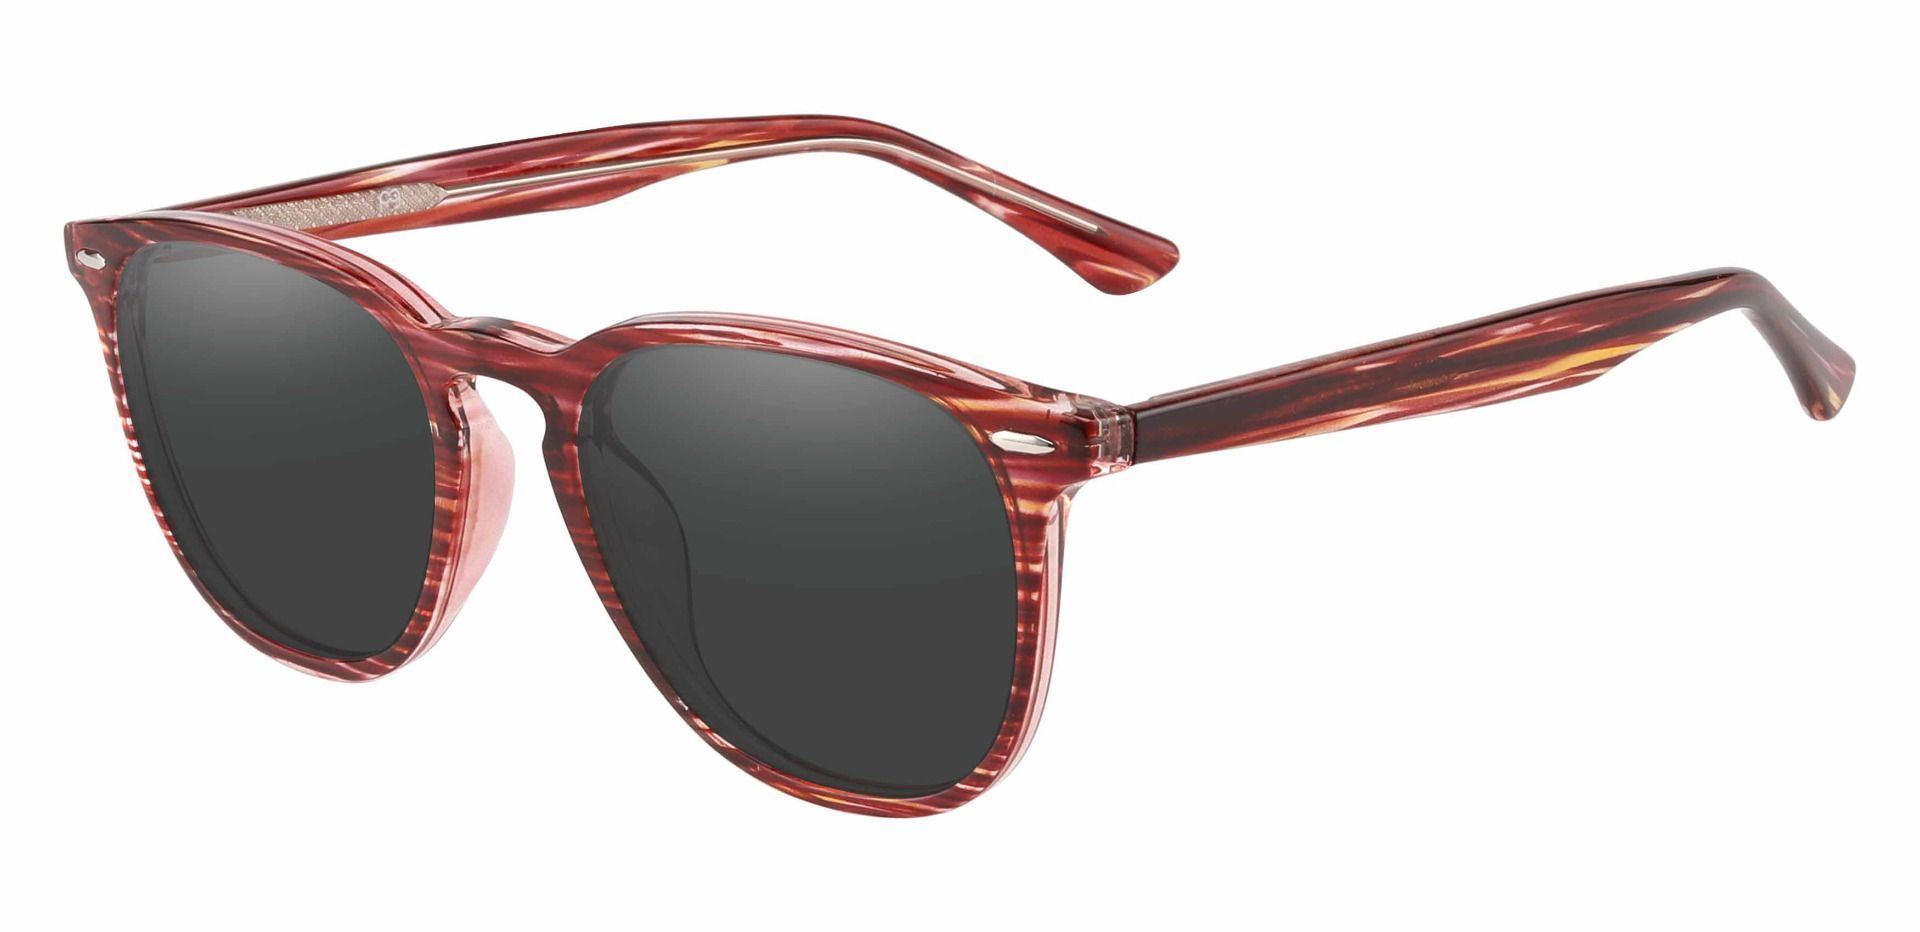 Sycamore Oval Reading Sunglasses - Red Frame With Gray Lenses